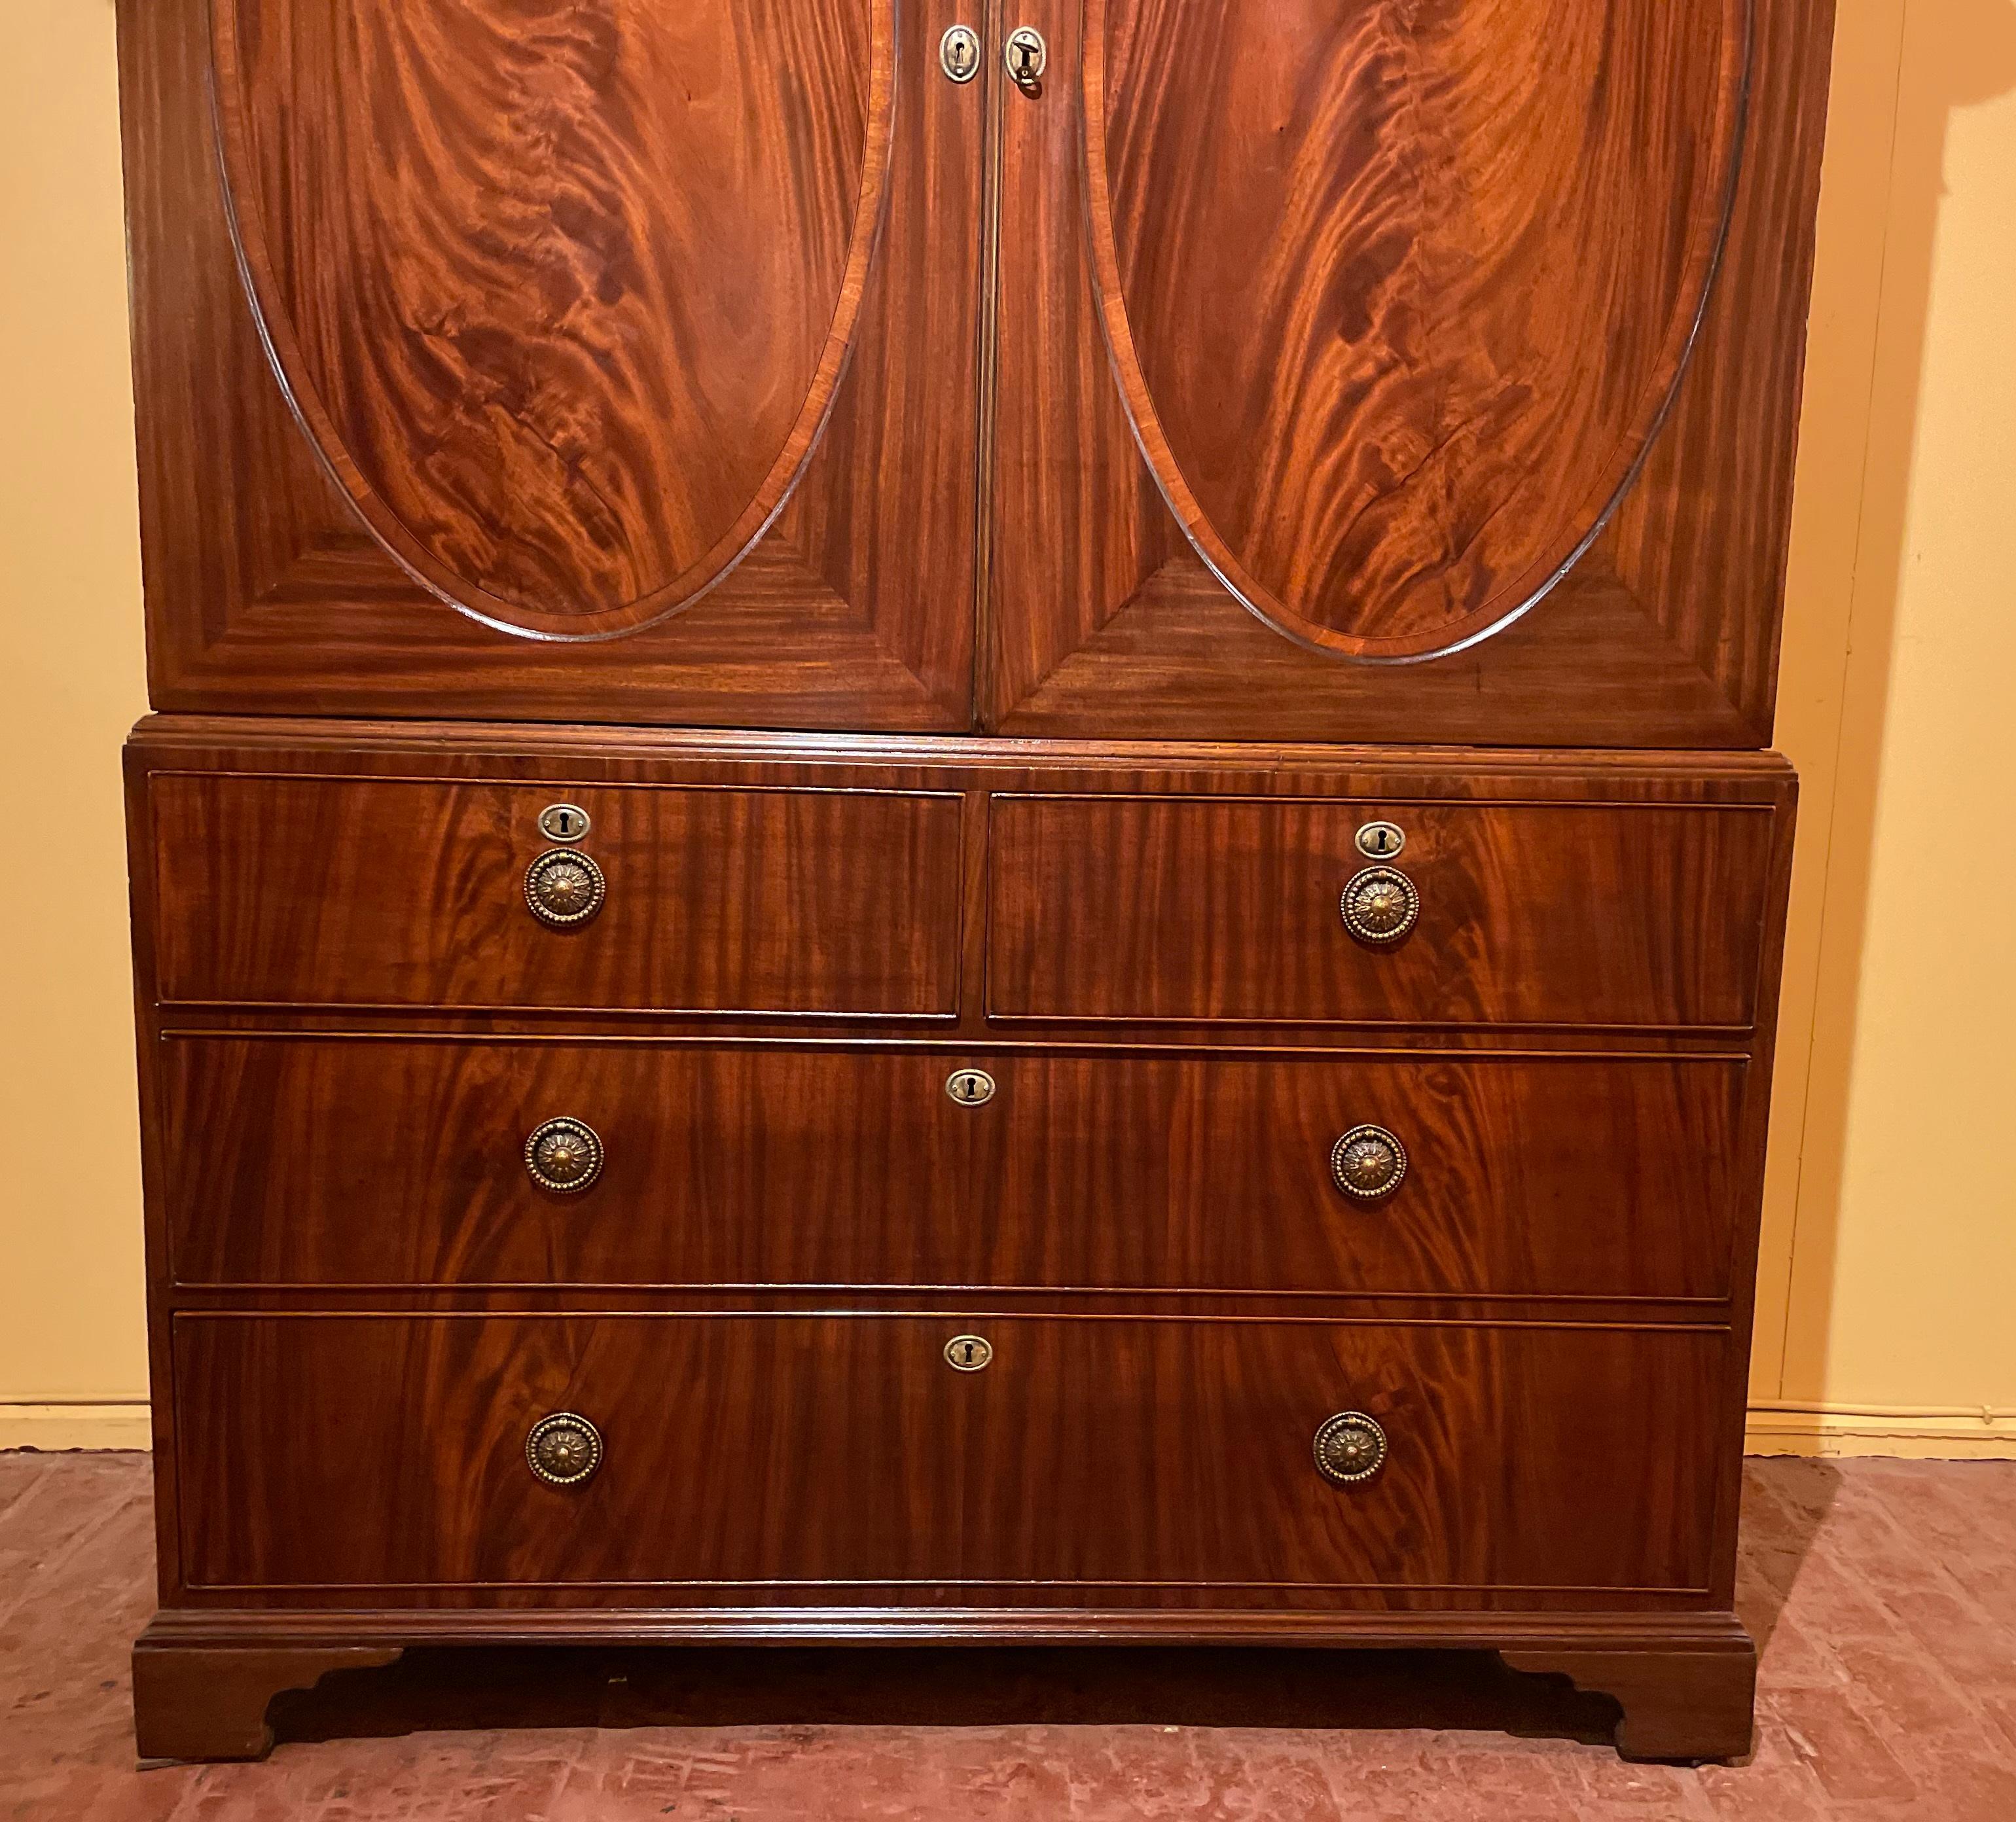 Superb linen press in mahogany Sheraton period from the 18th century from England

The linen press is in two parts and is composed of 4 drawers at the bottom and two doors at the top
Very elegant cabinet witch has two ovals on the two doors. This